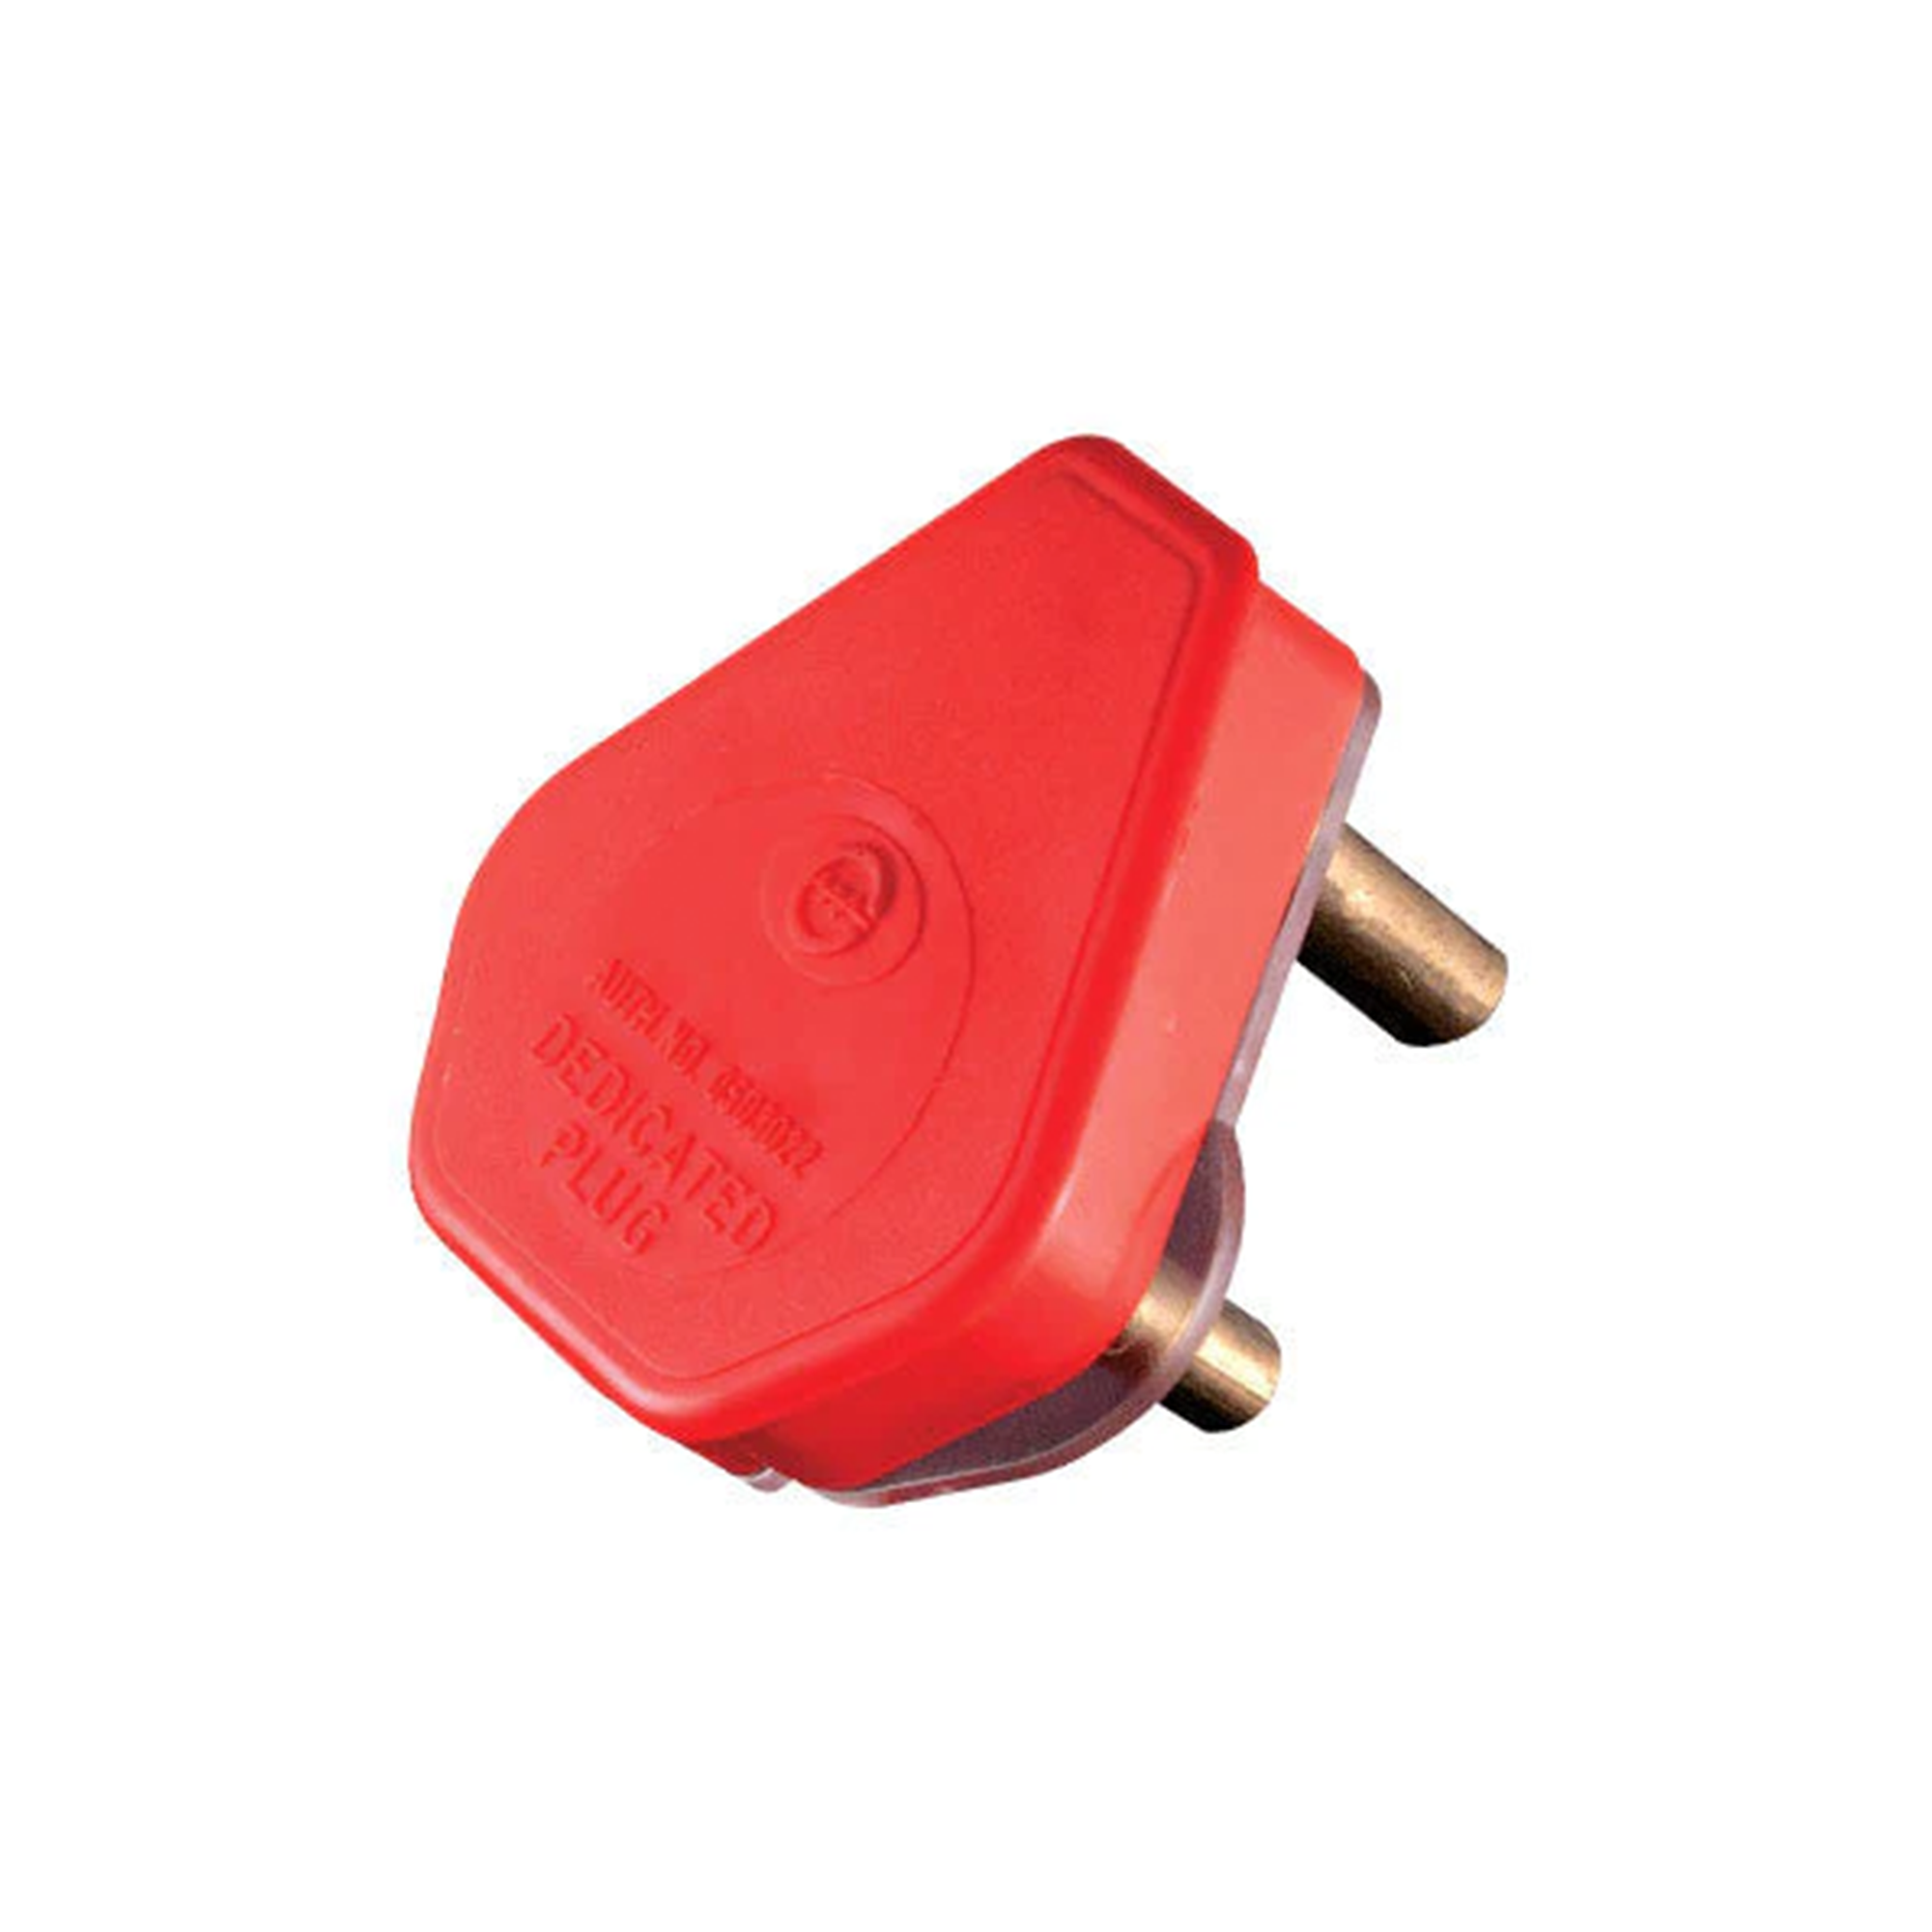 Crabtree Domestic Plug Top 3 Pin 16A Red